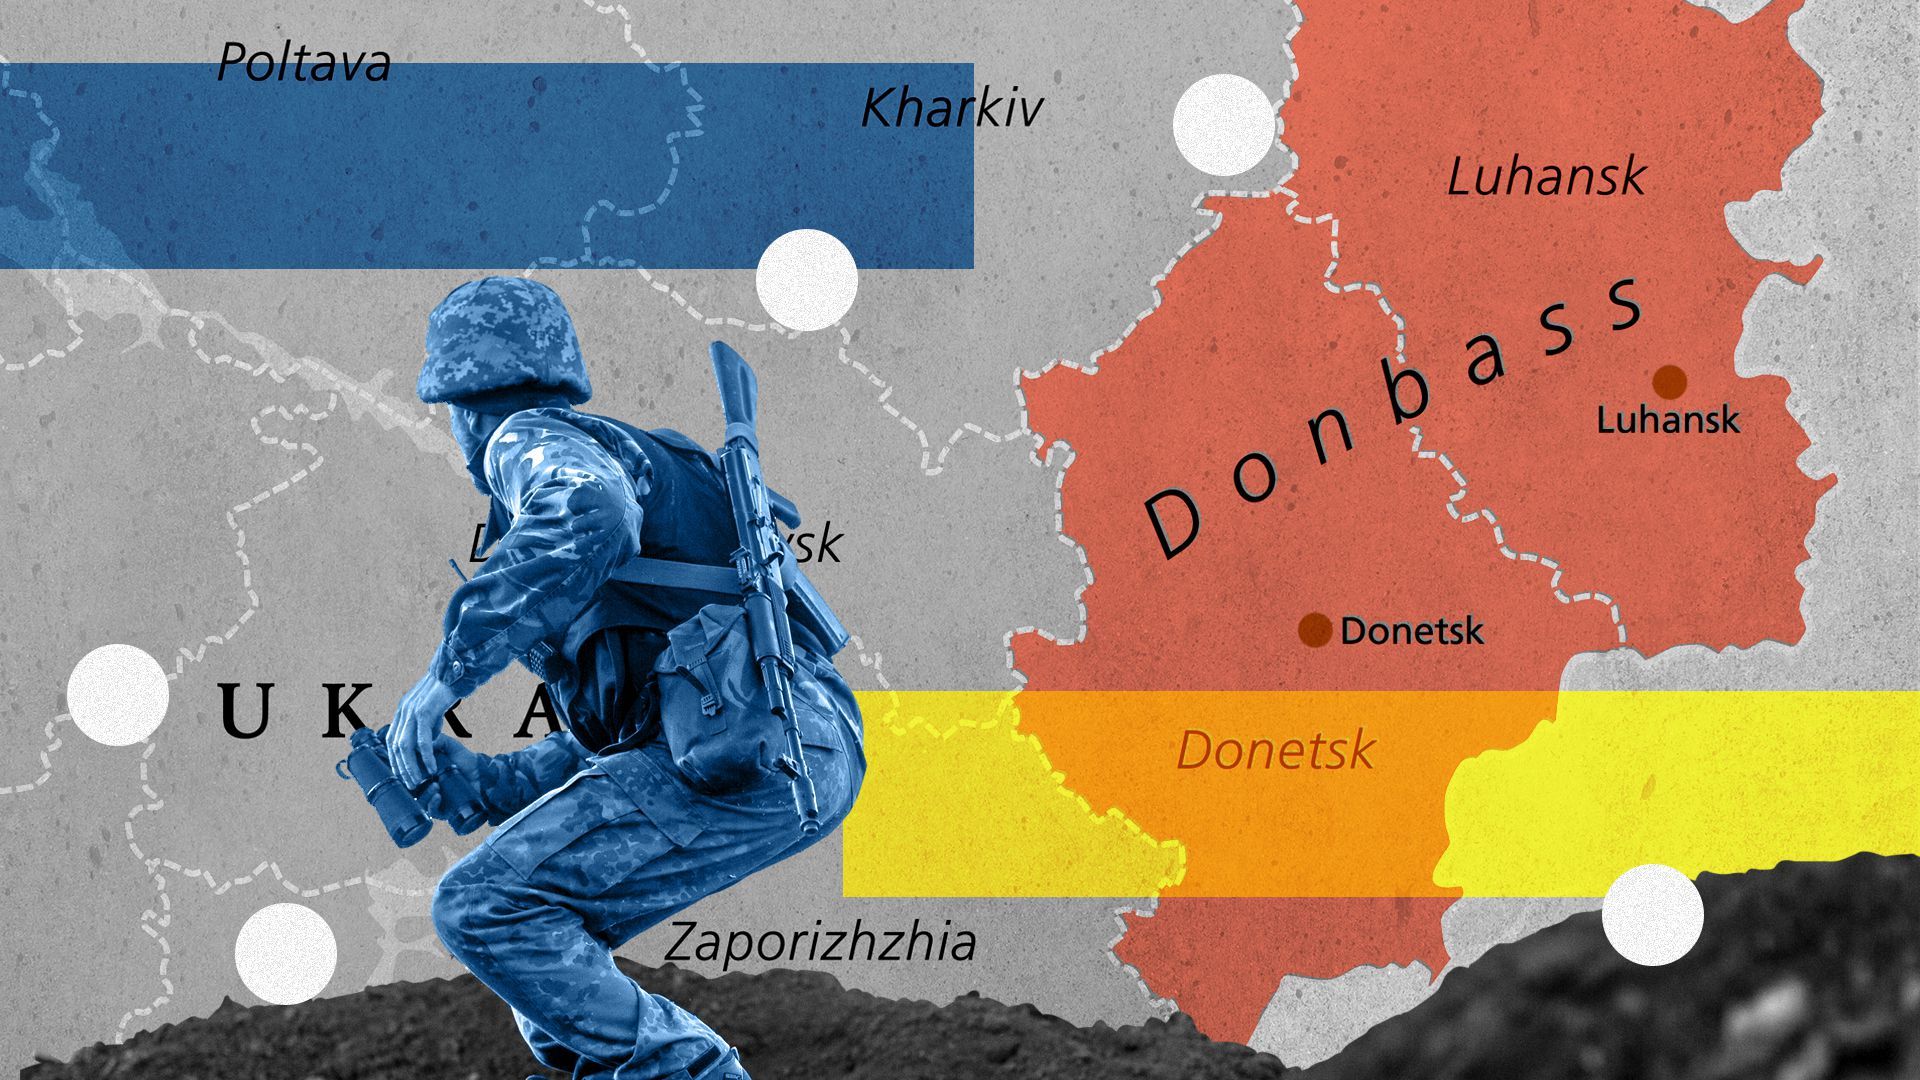 Photo illustration of a Ukrainian soldier with a map of Ukraine and the Donbas region in the background